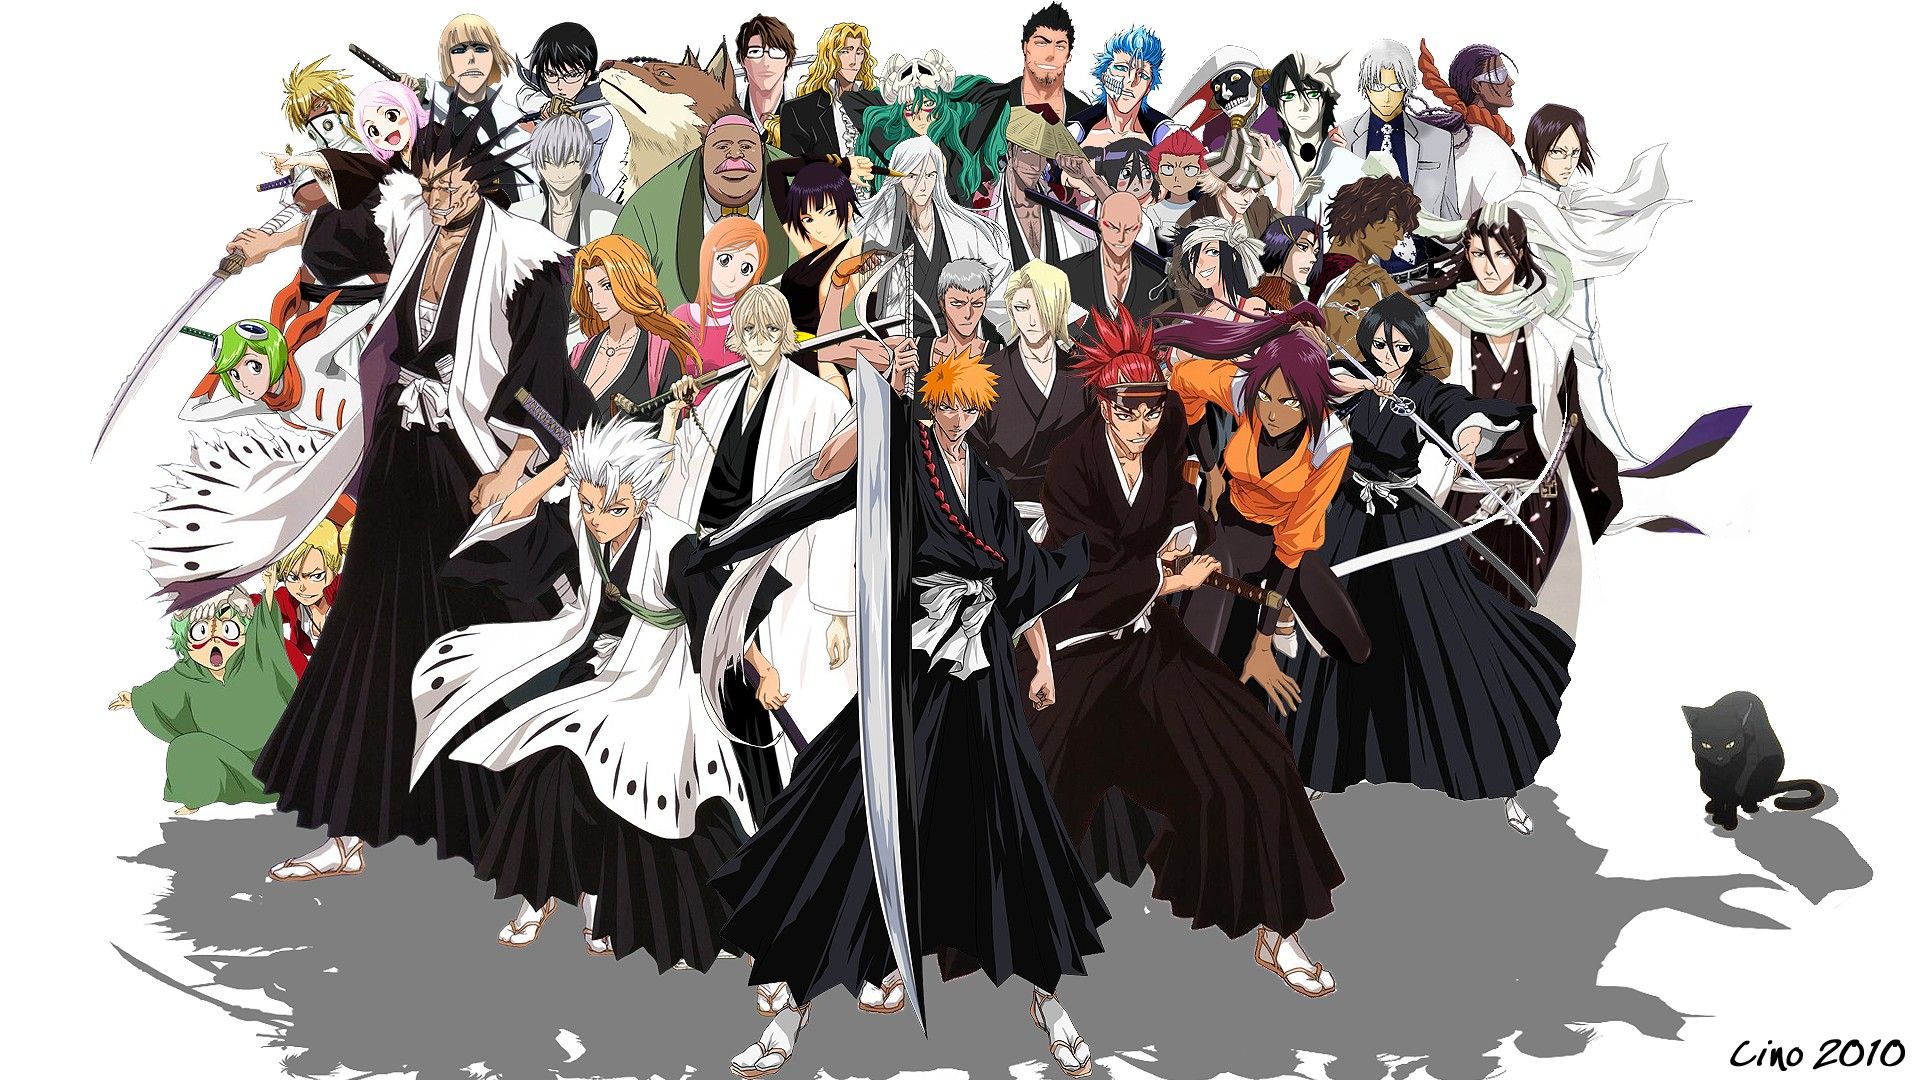 Ichigo vs Aizen (One of the greatest battles of all times)